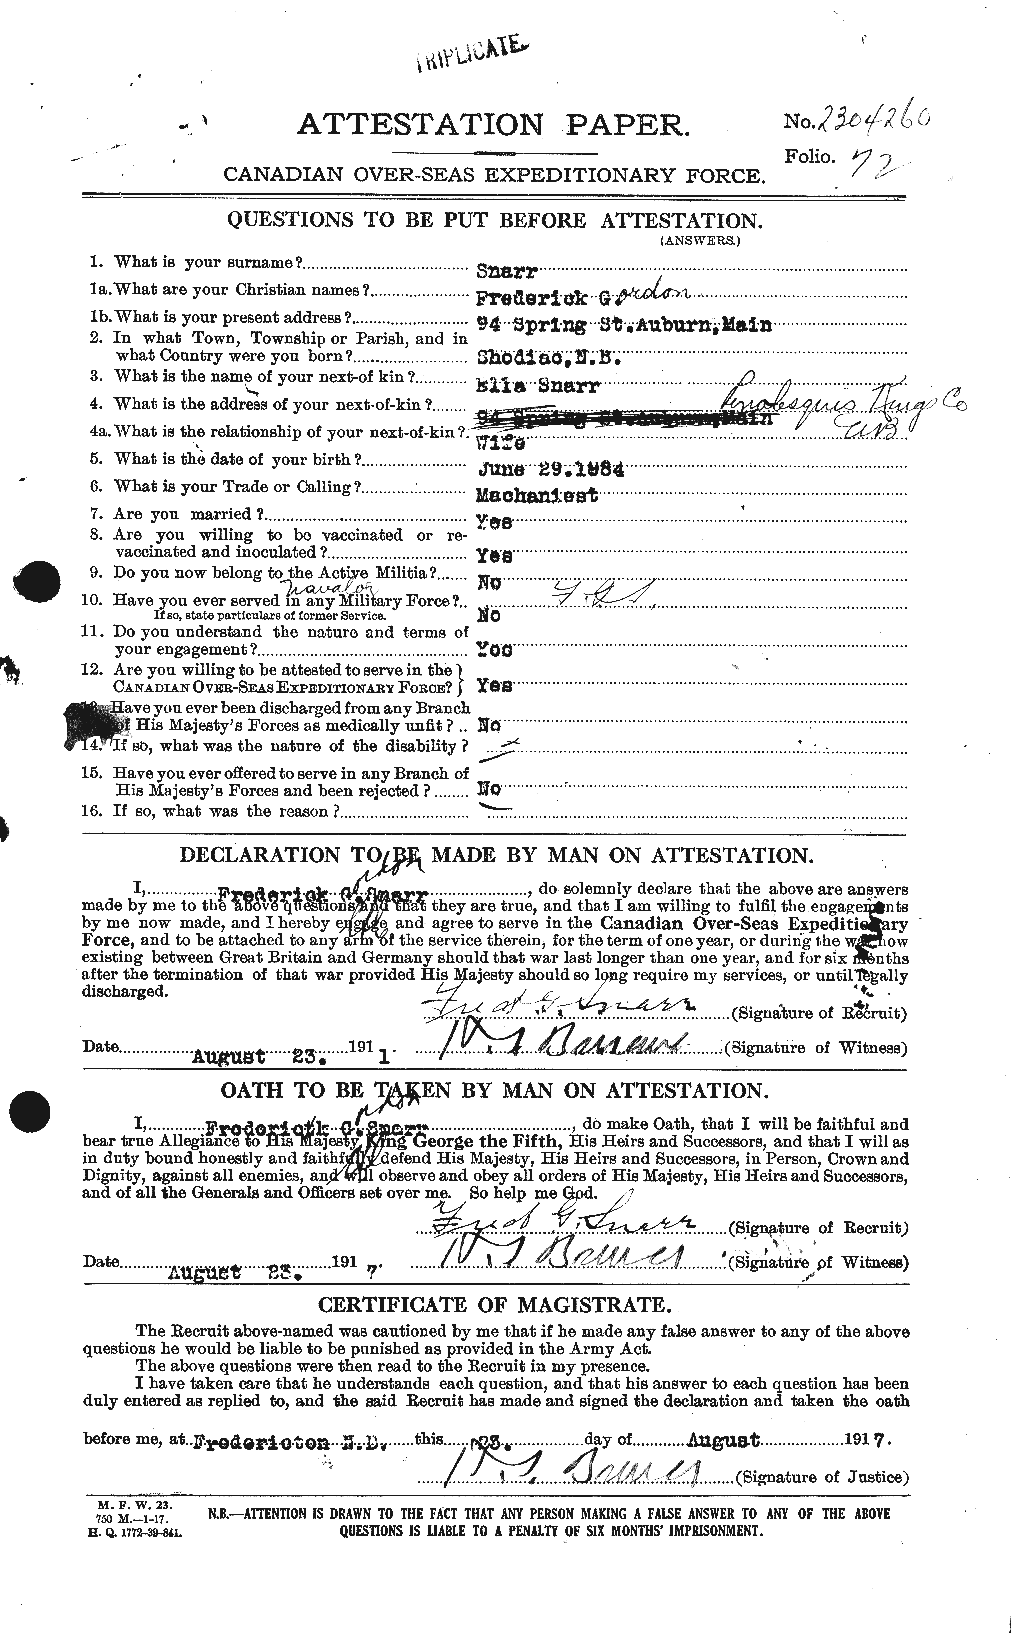 Personnel Records of the First World War - CEF 111300a